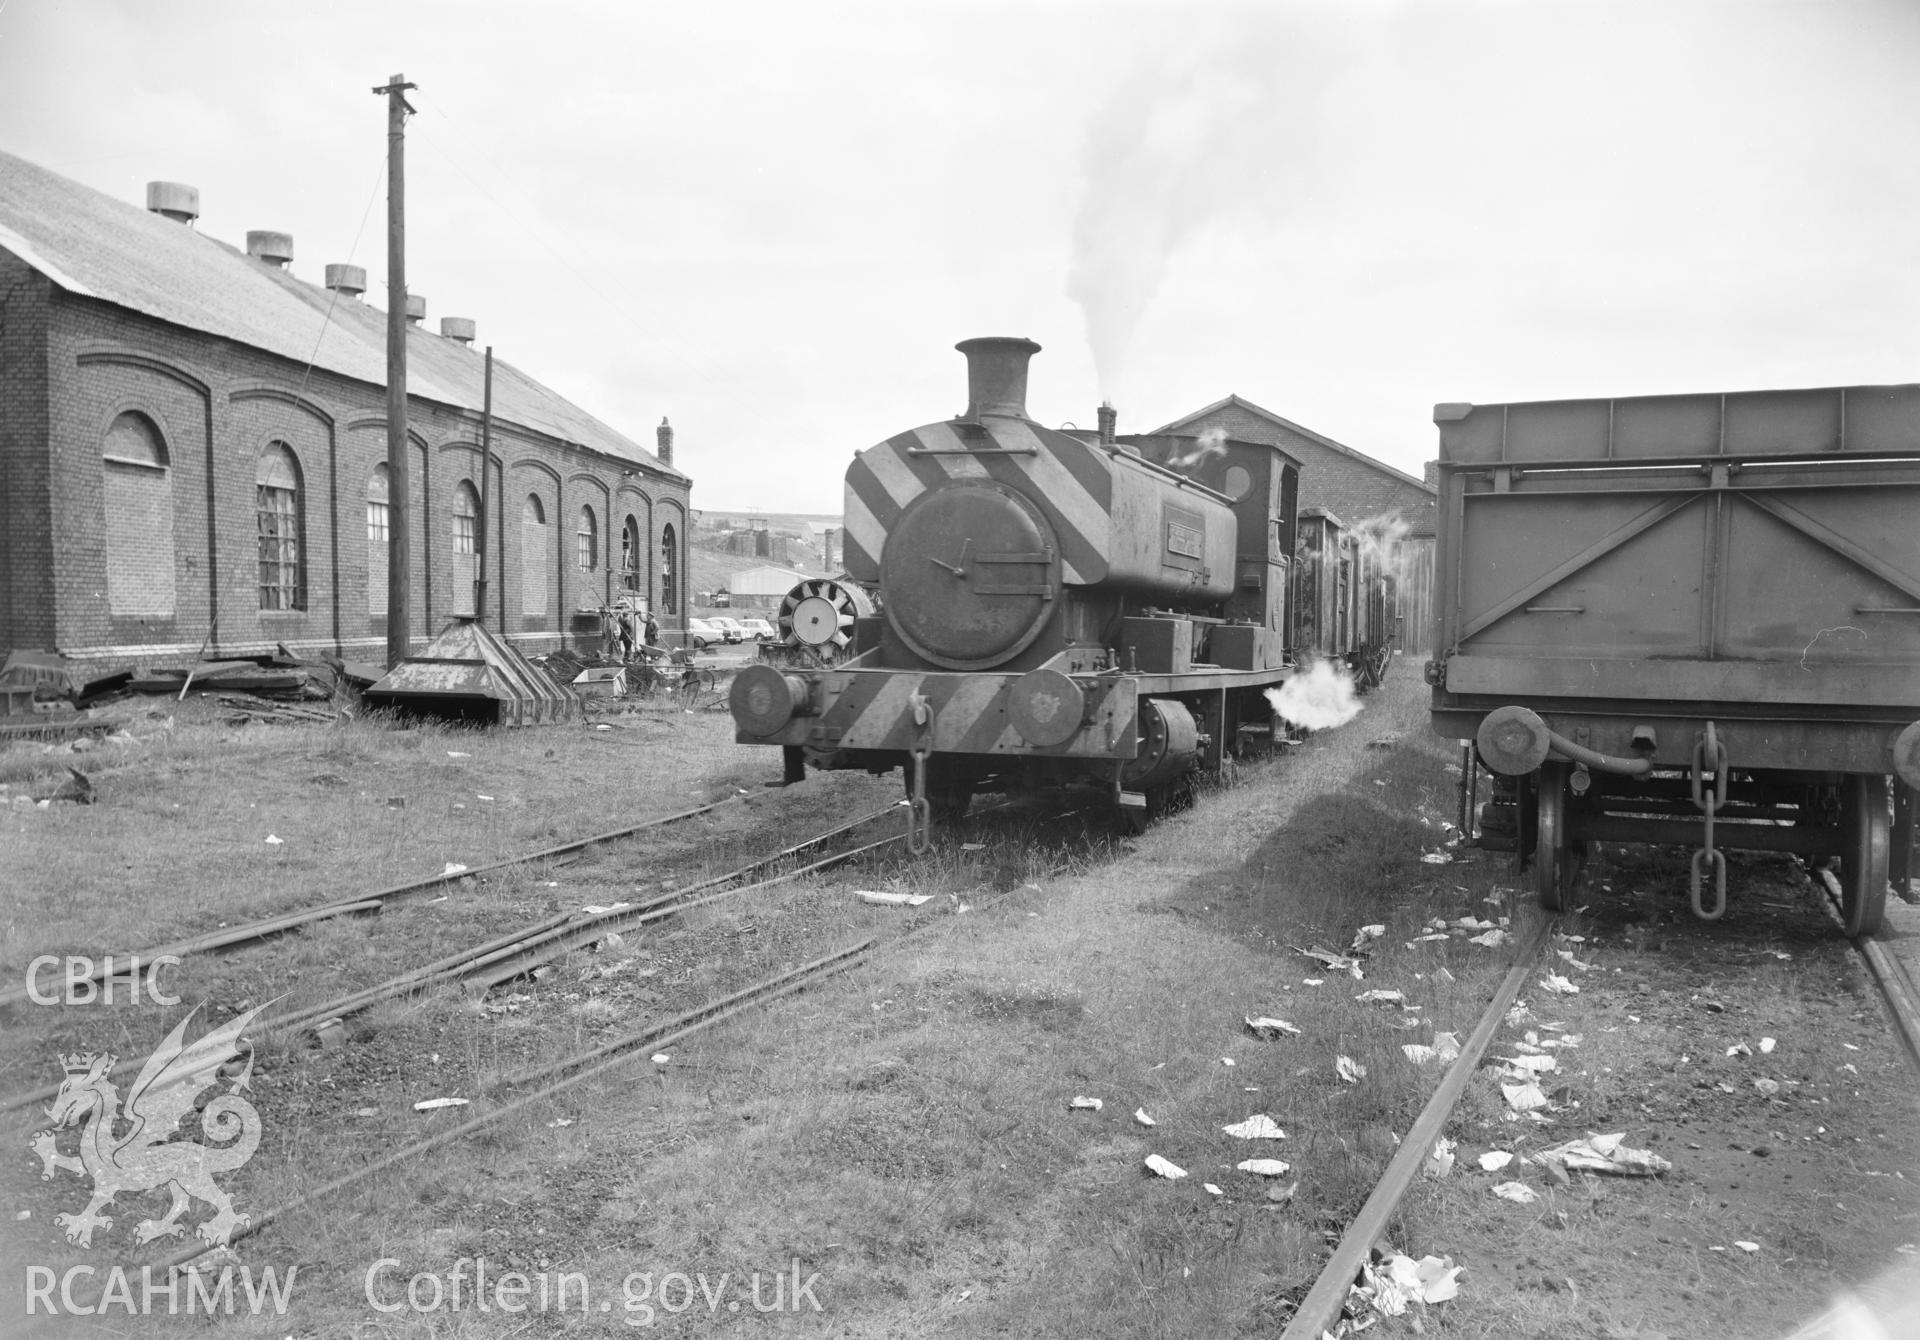 Digital copy of an acetate negative showing Big Pit - Steam loco working outside engine sheds, from the John Cornwell Collection.